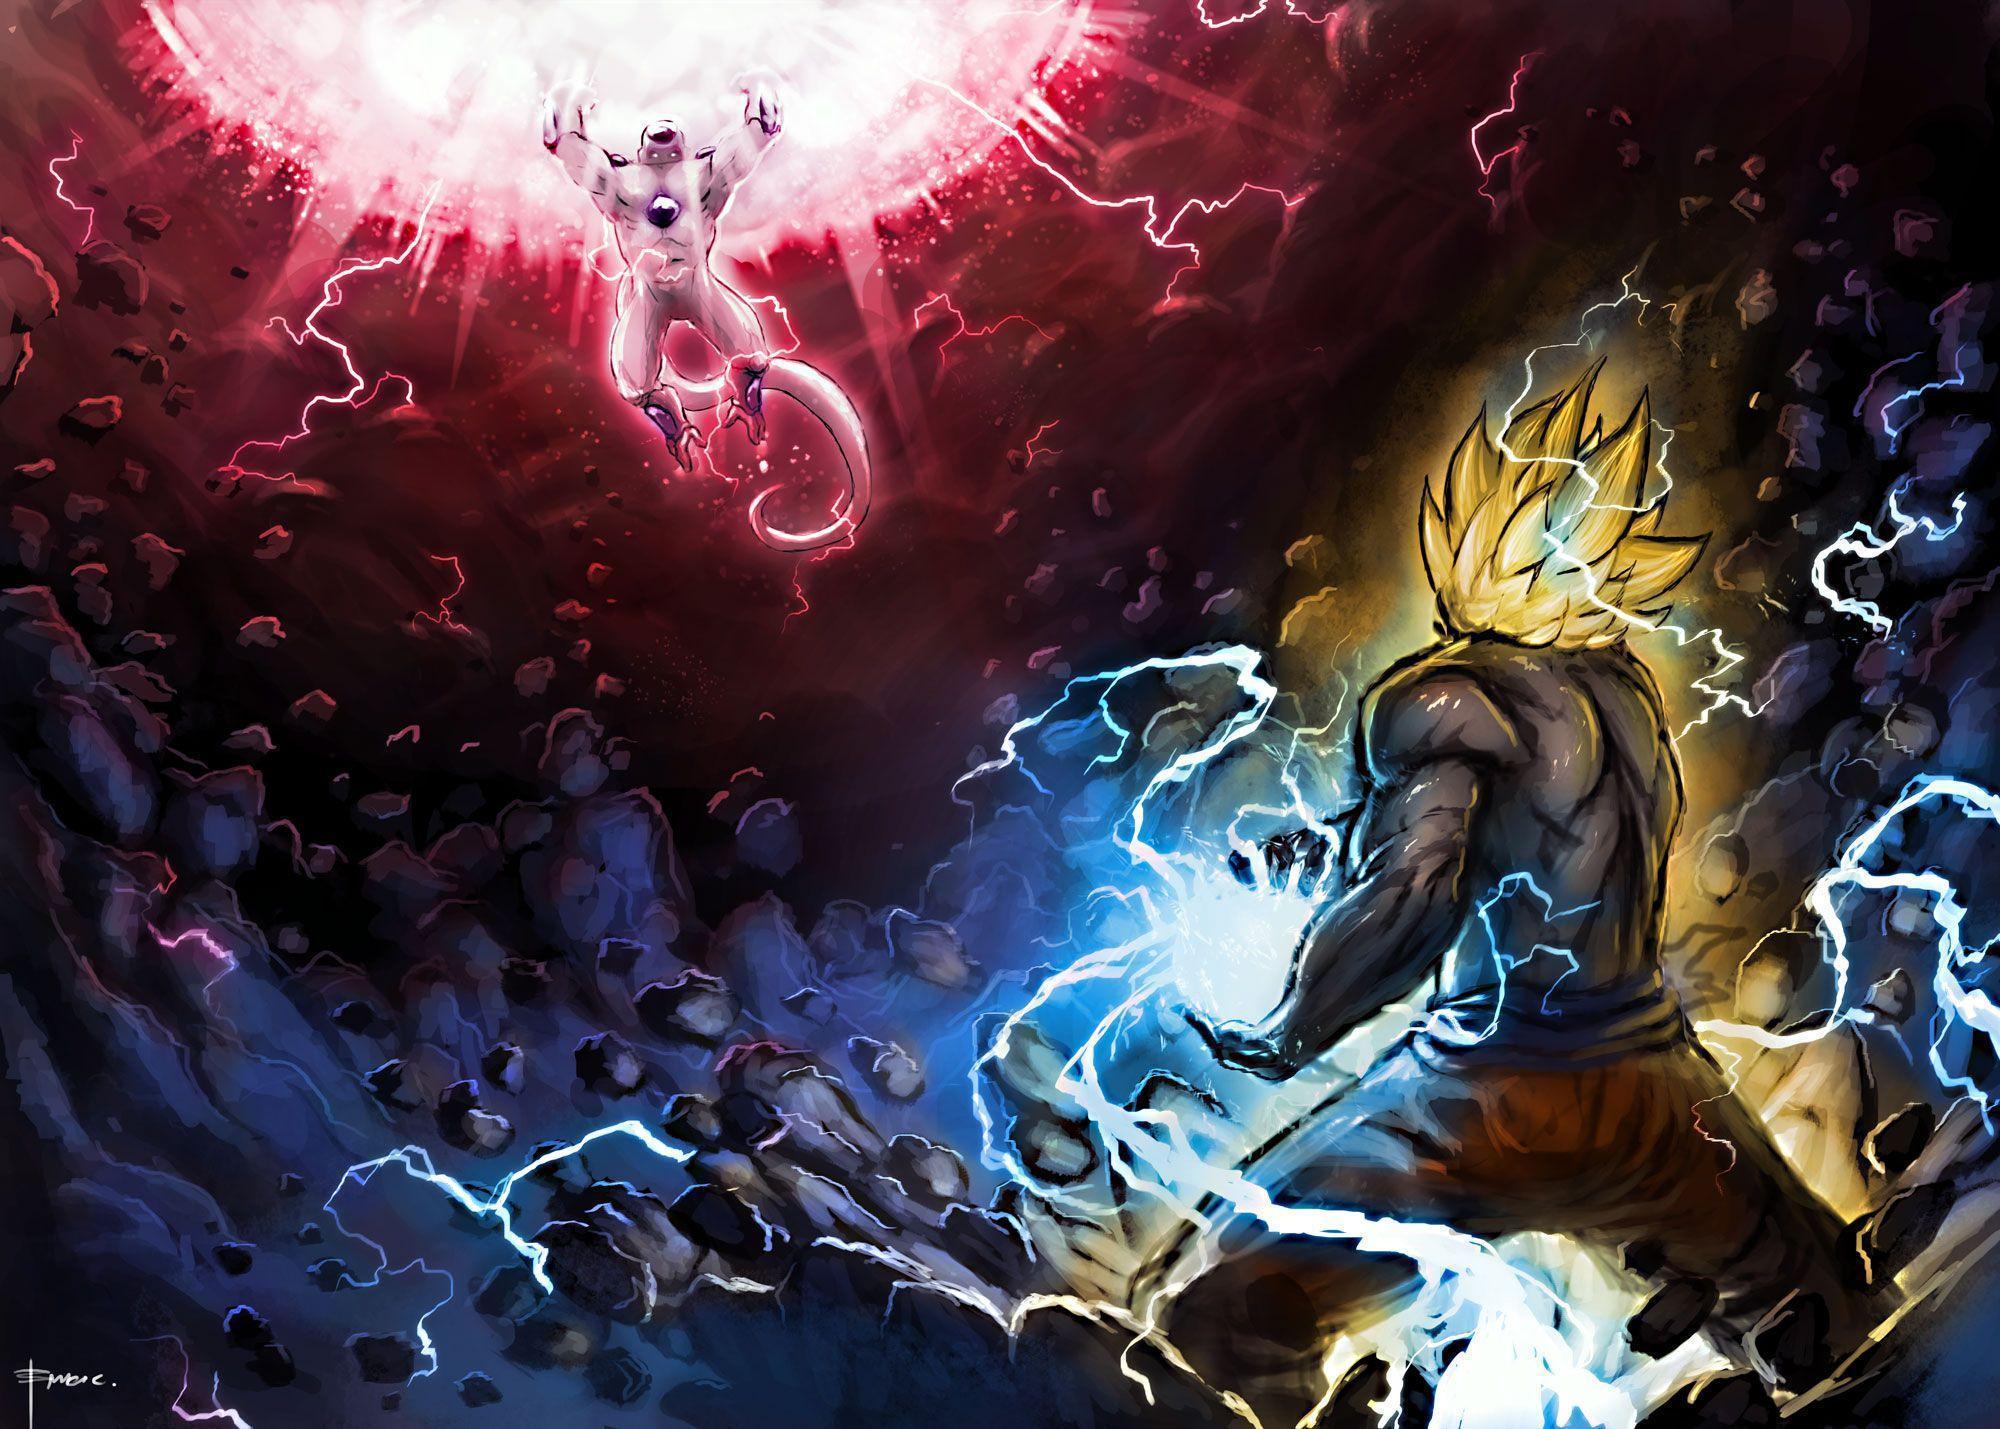 Goku vs. Frieza Full HD Wallpapers and Backgrounds Image